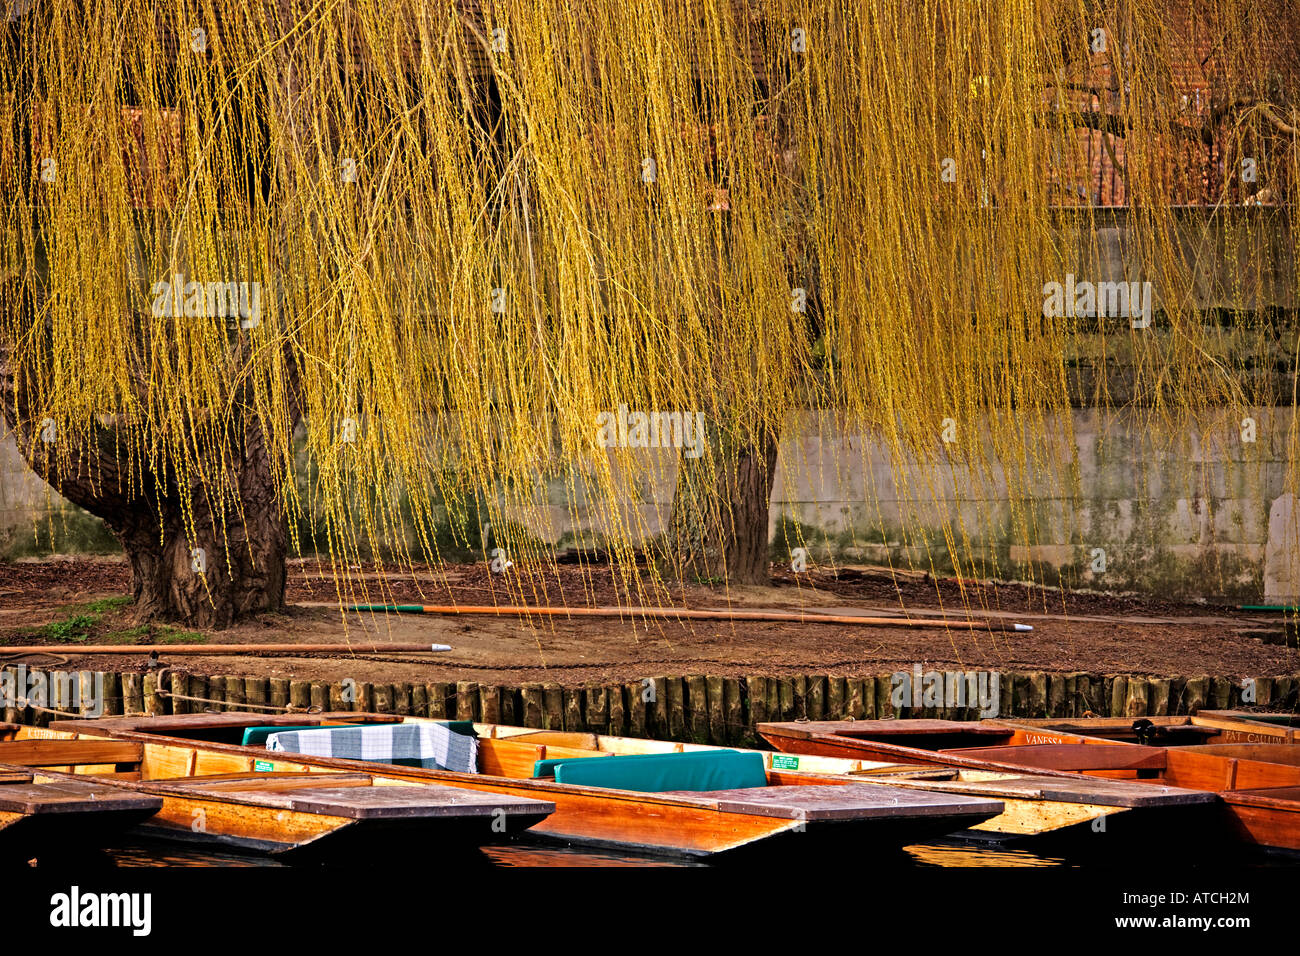 Weeping Willows on the cam. cambridge, Cambridgeshire. East Anglia. UK. Stock Photo